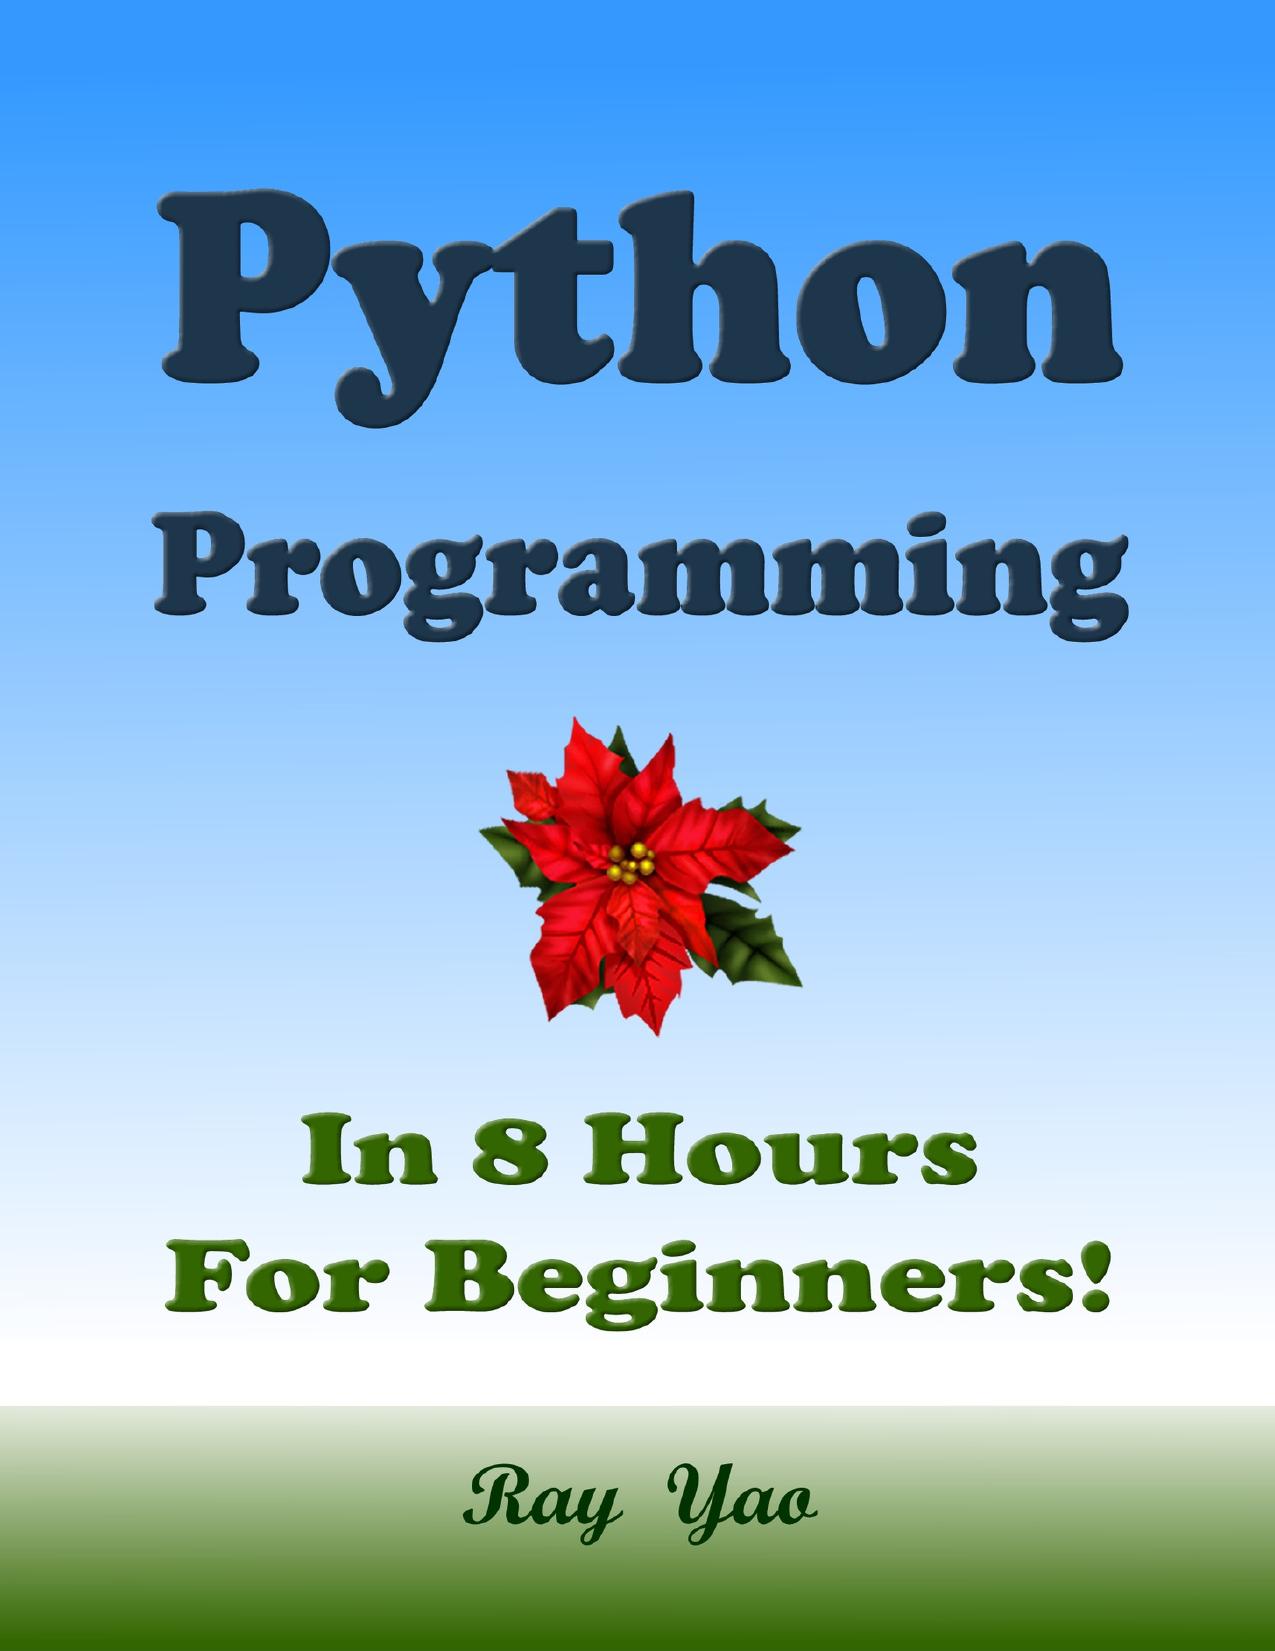 PYTHON Programming, In 8 Hours, For Beginners! by Yao Ray